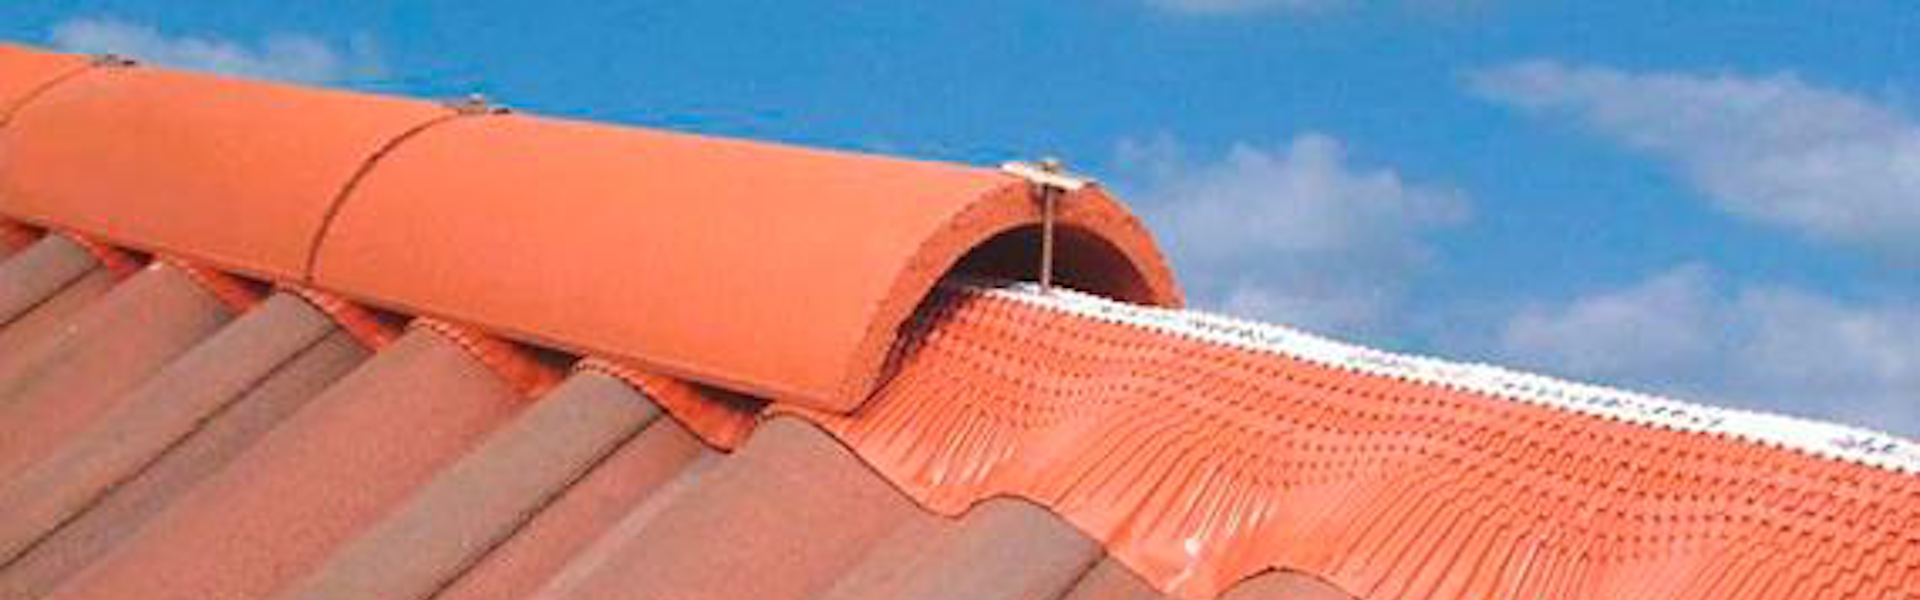 Total Roofing and Home Improvements